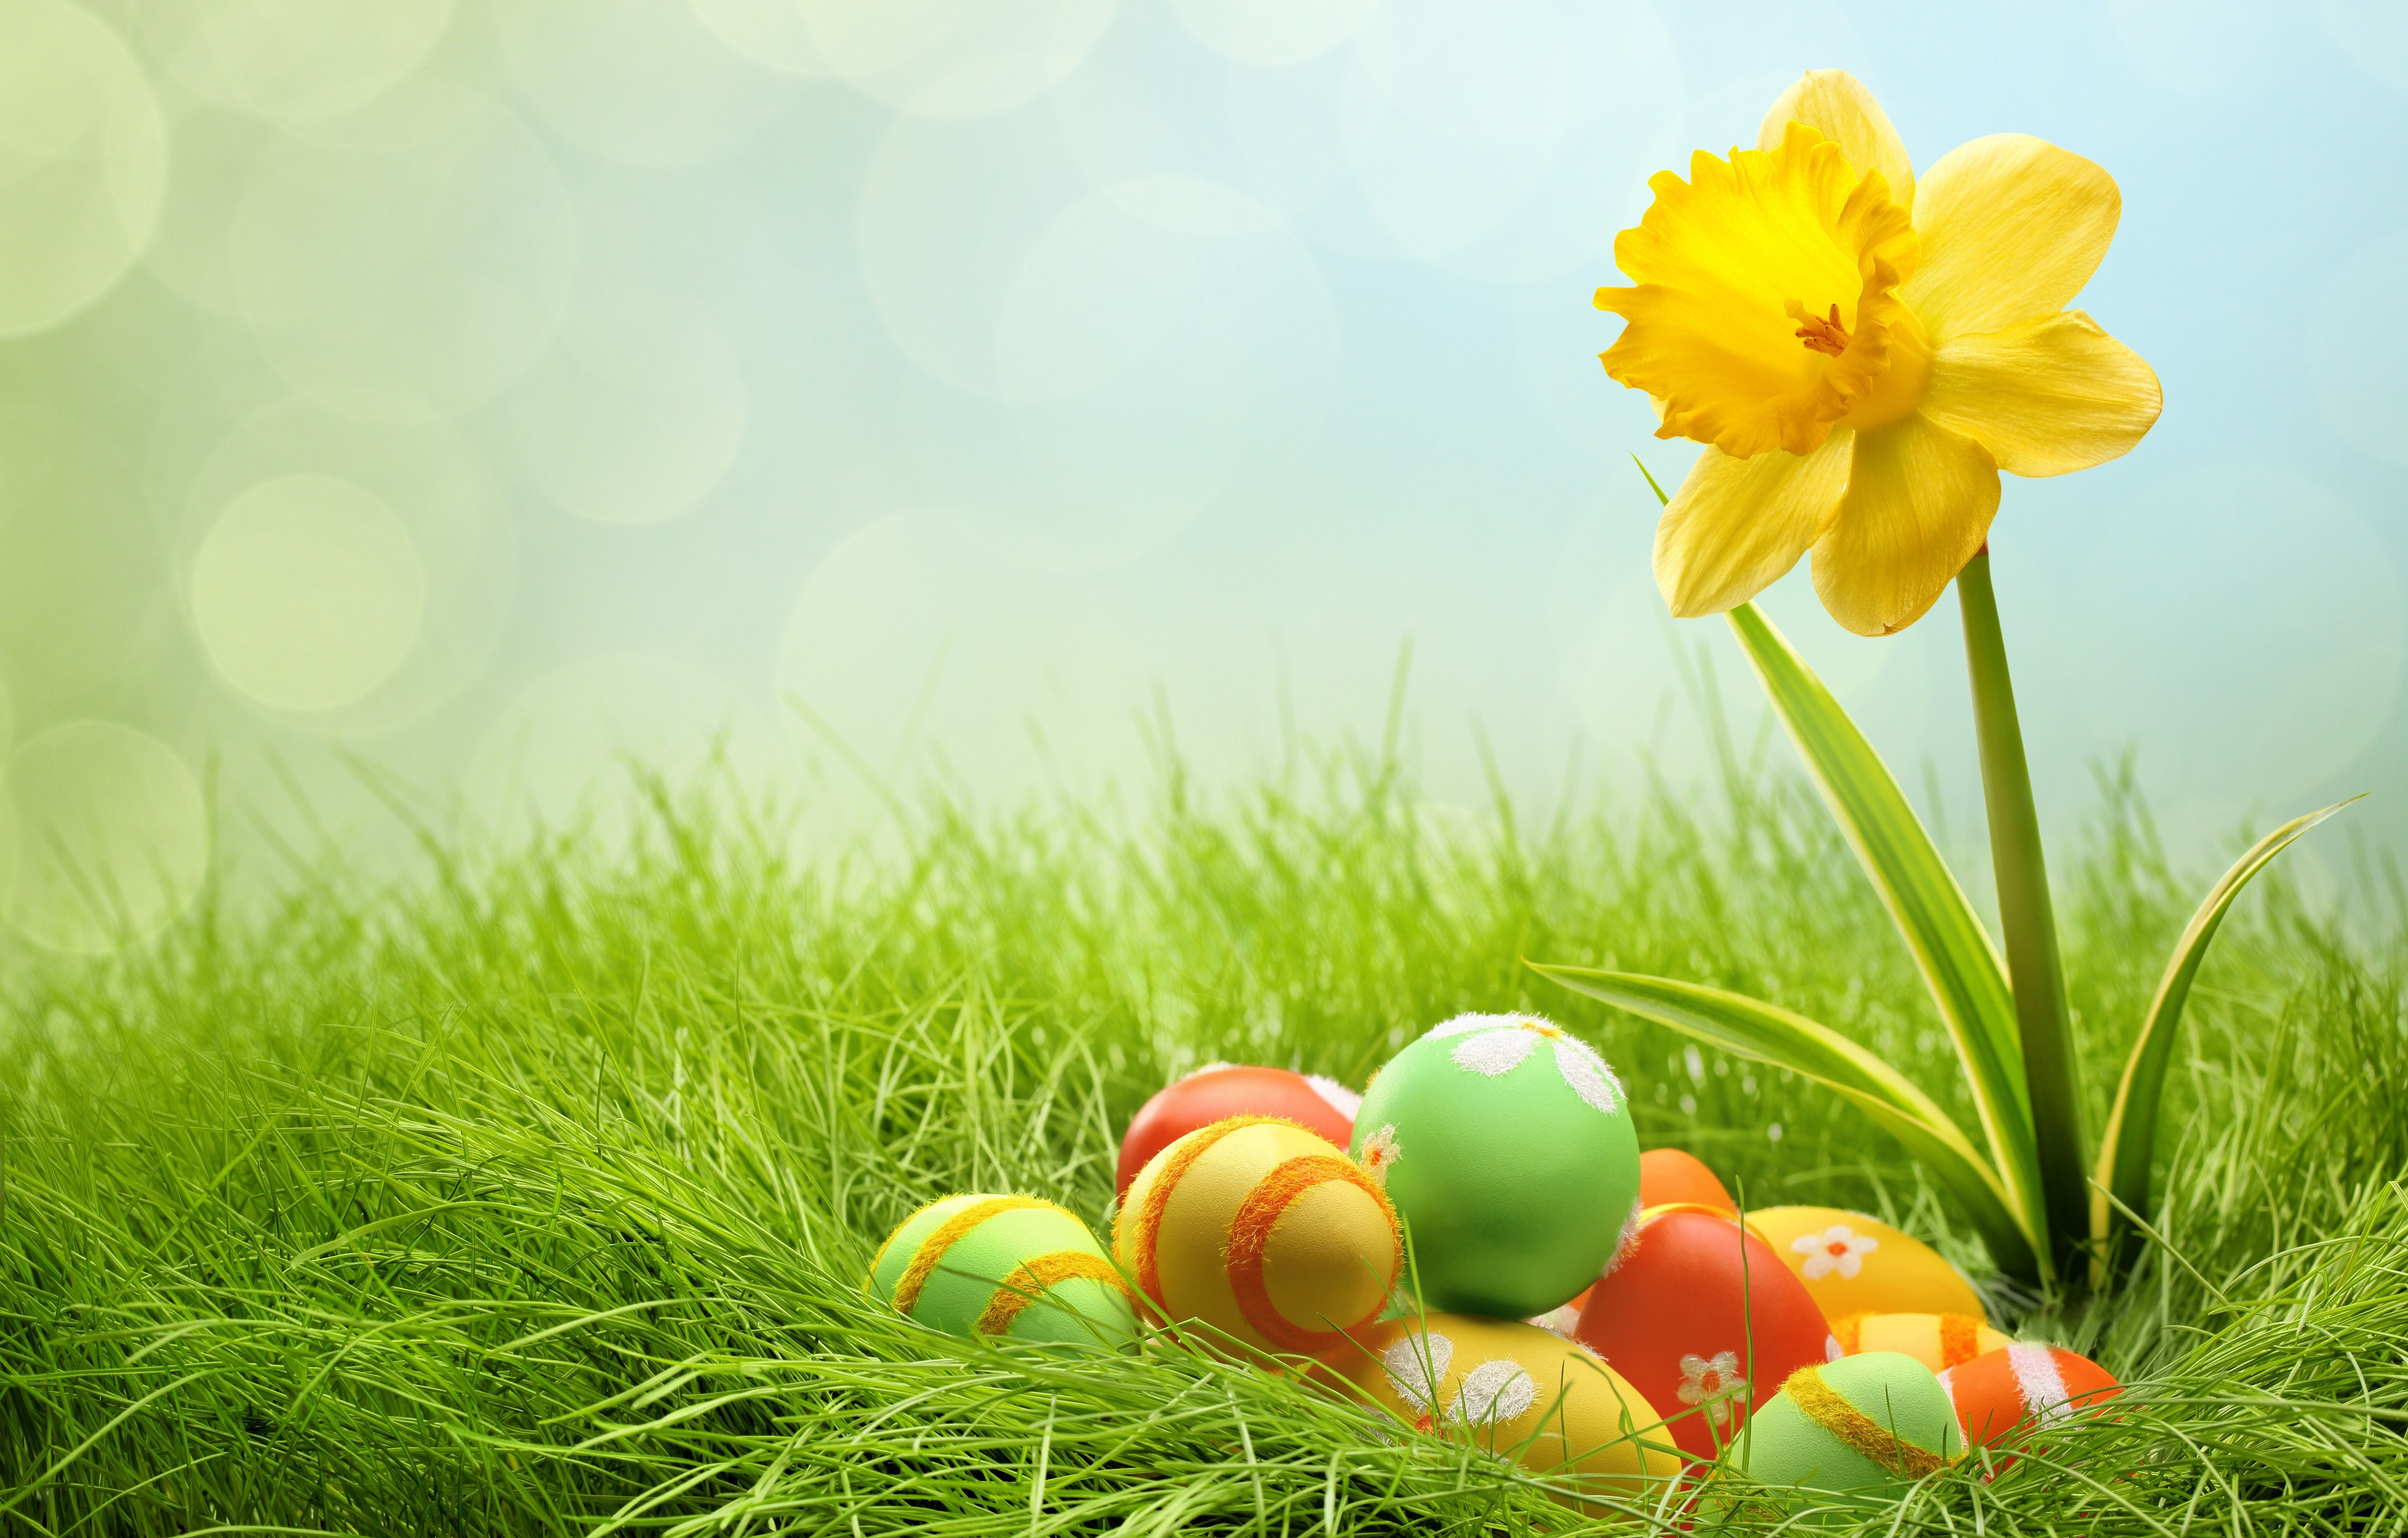 Free download Eggs and yellow flower for Easter wallpaper and image wallpaper [5760x3679] for your Desktop, Mobile & Tablet. Explore Easter Flower Image Wallpaper. Free Easter Flower Wallpaper